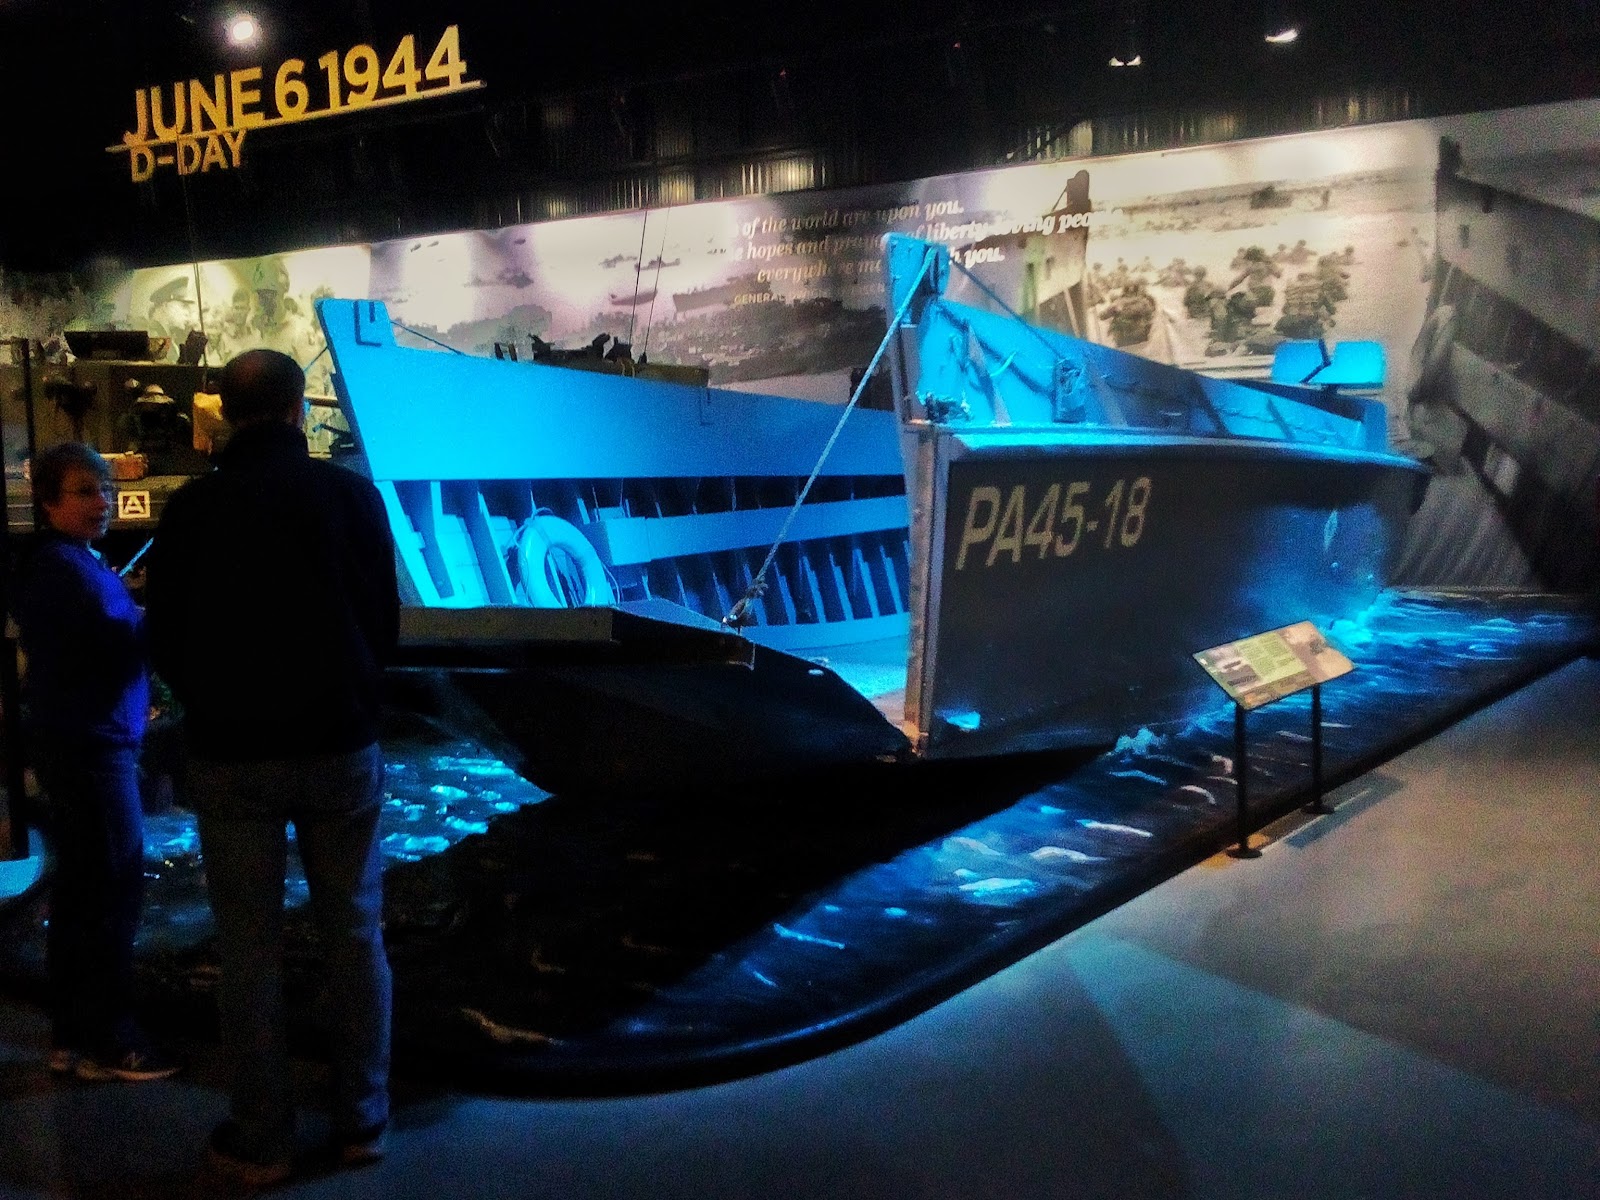 Higgins Boat from Normandy D-Day Invasion Used by the USA